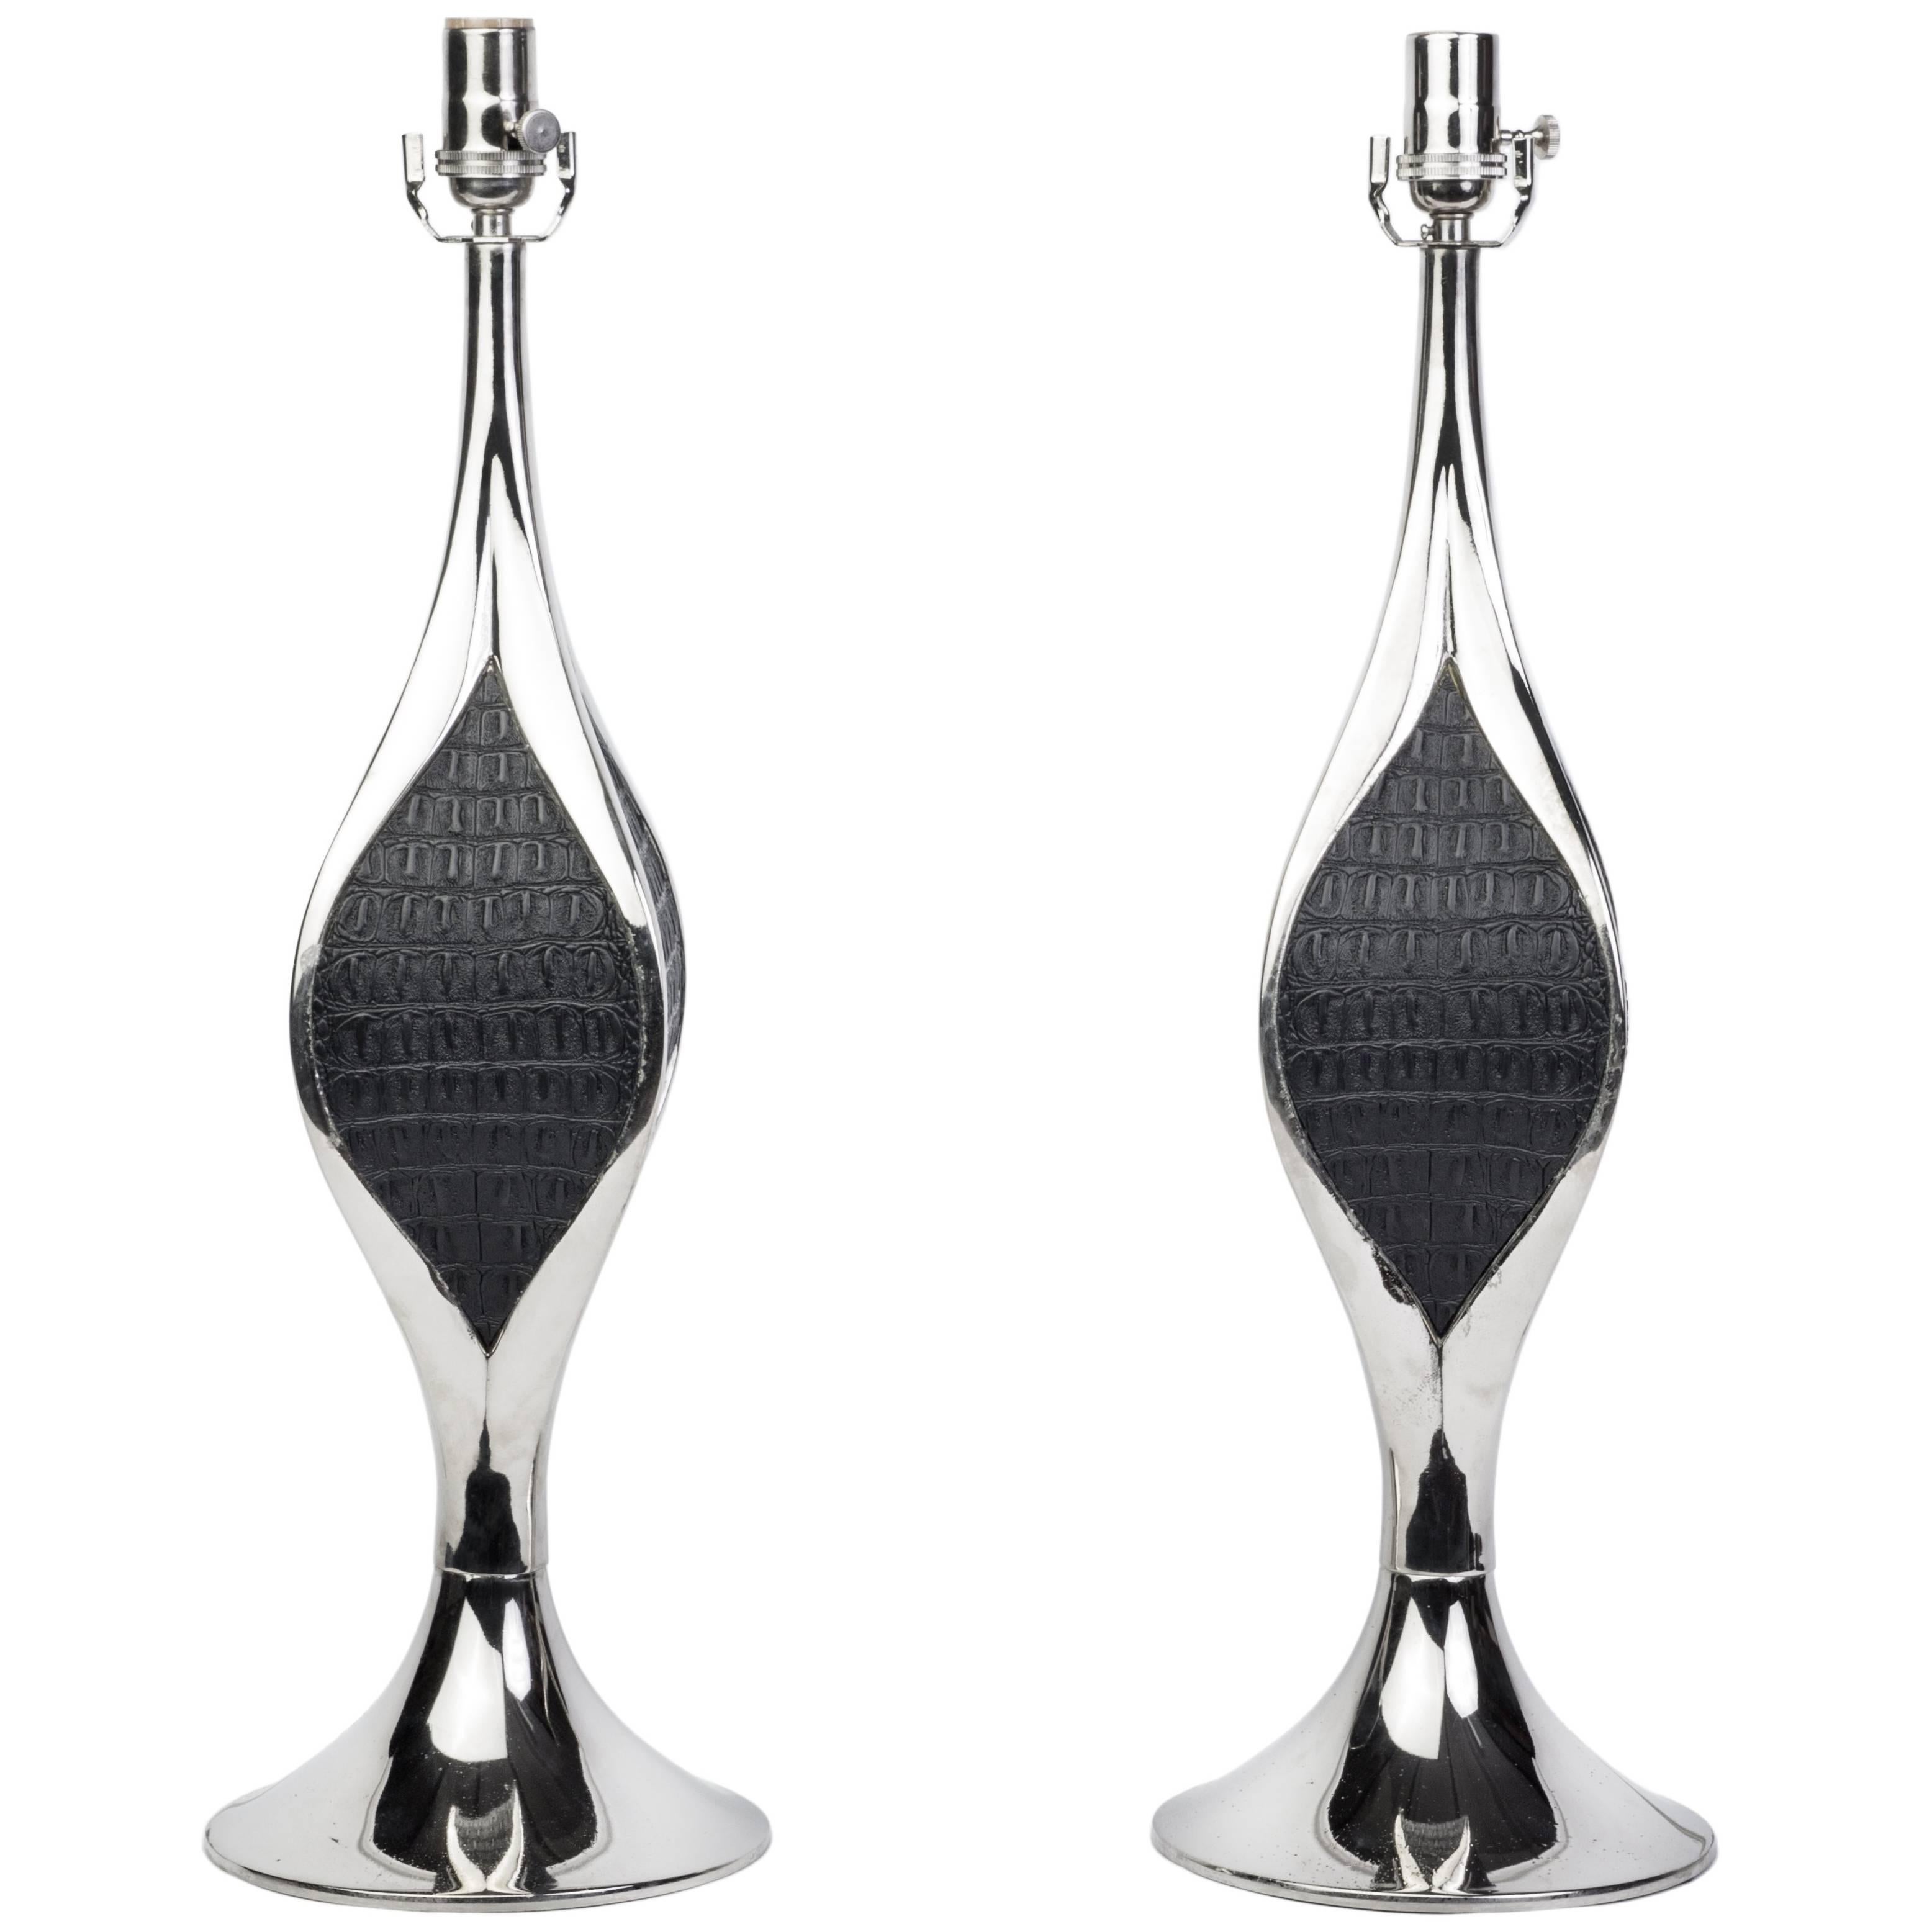 Pair of Mid-Century Modernist Sculptural Chrome Table Lamps by Laurel